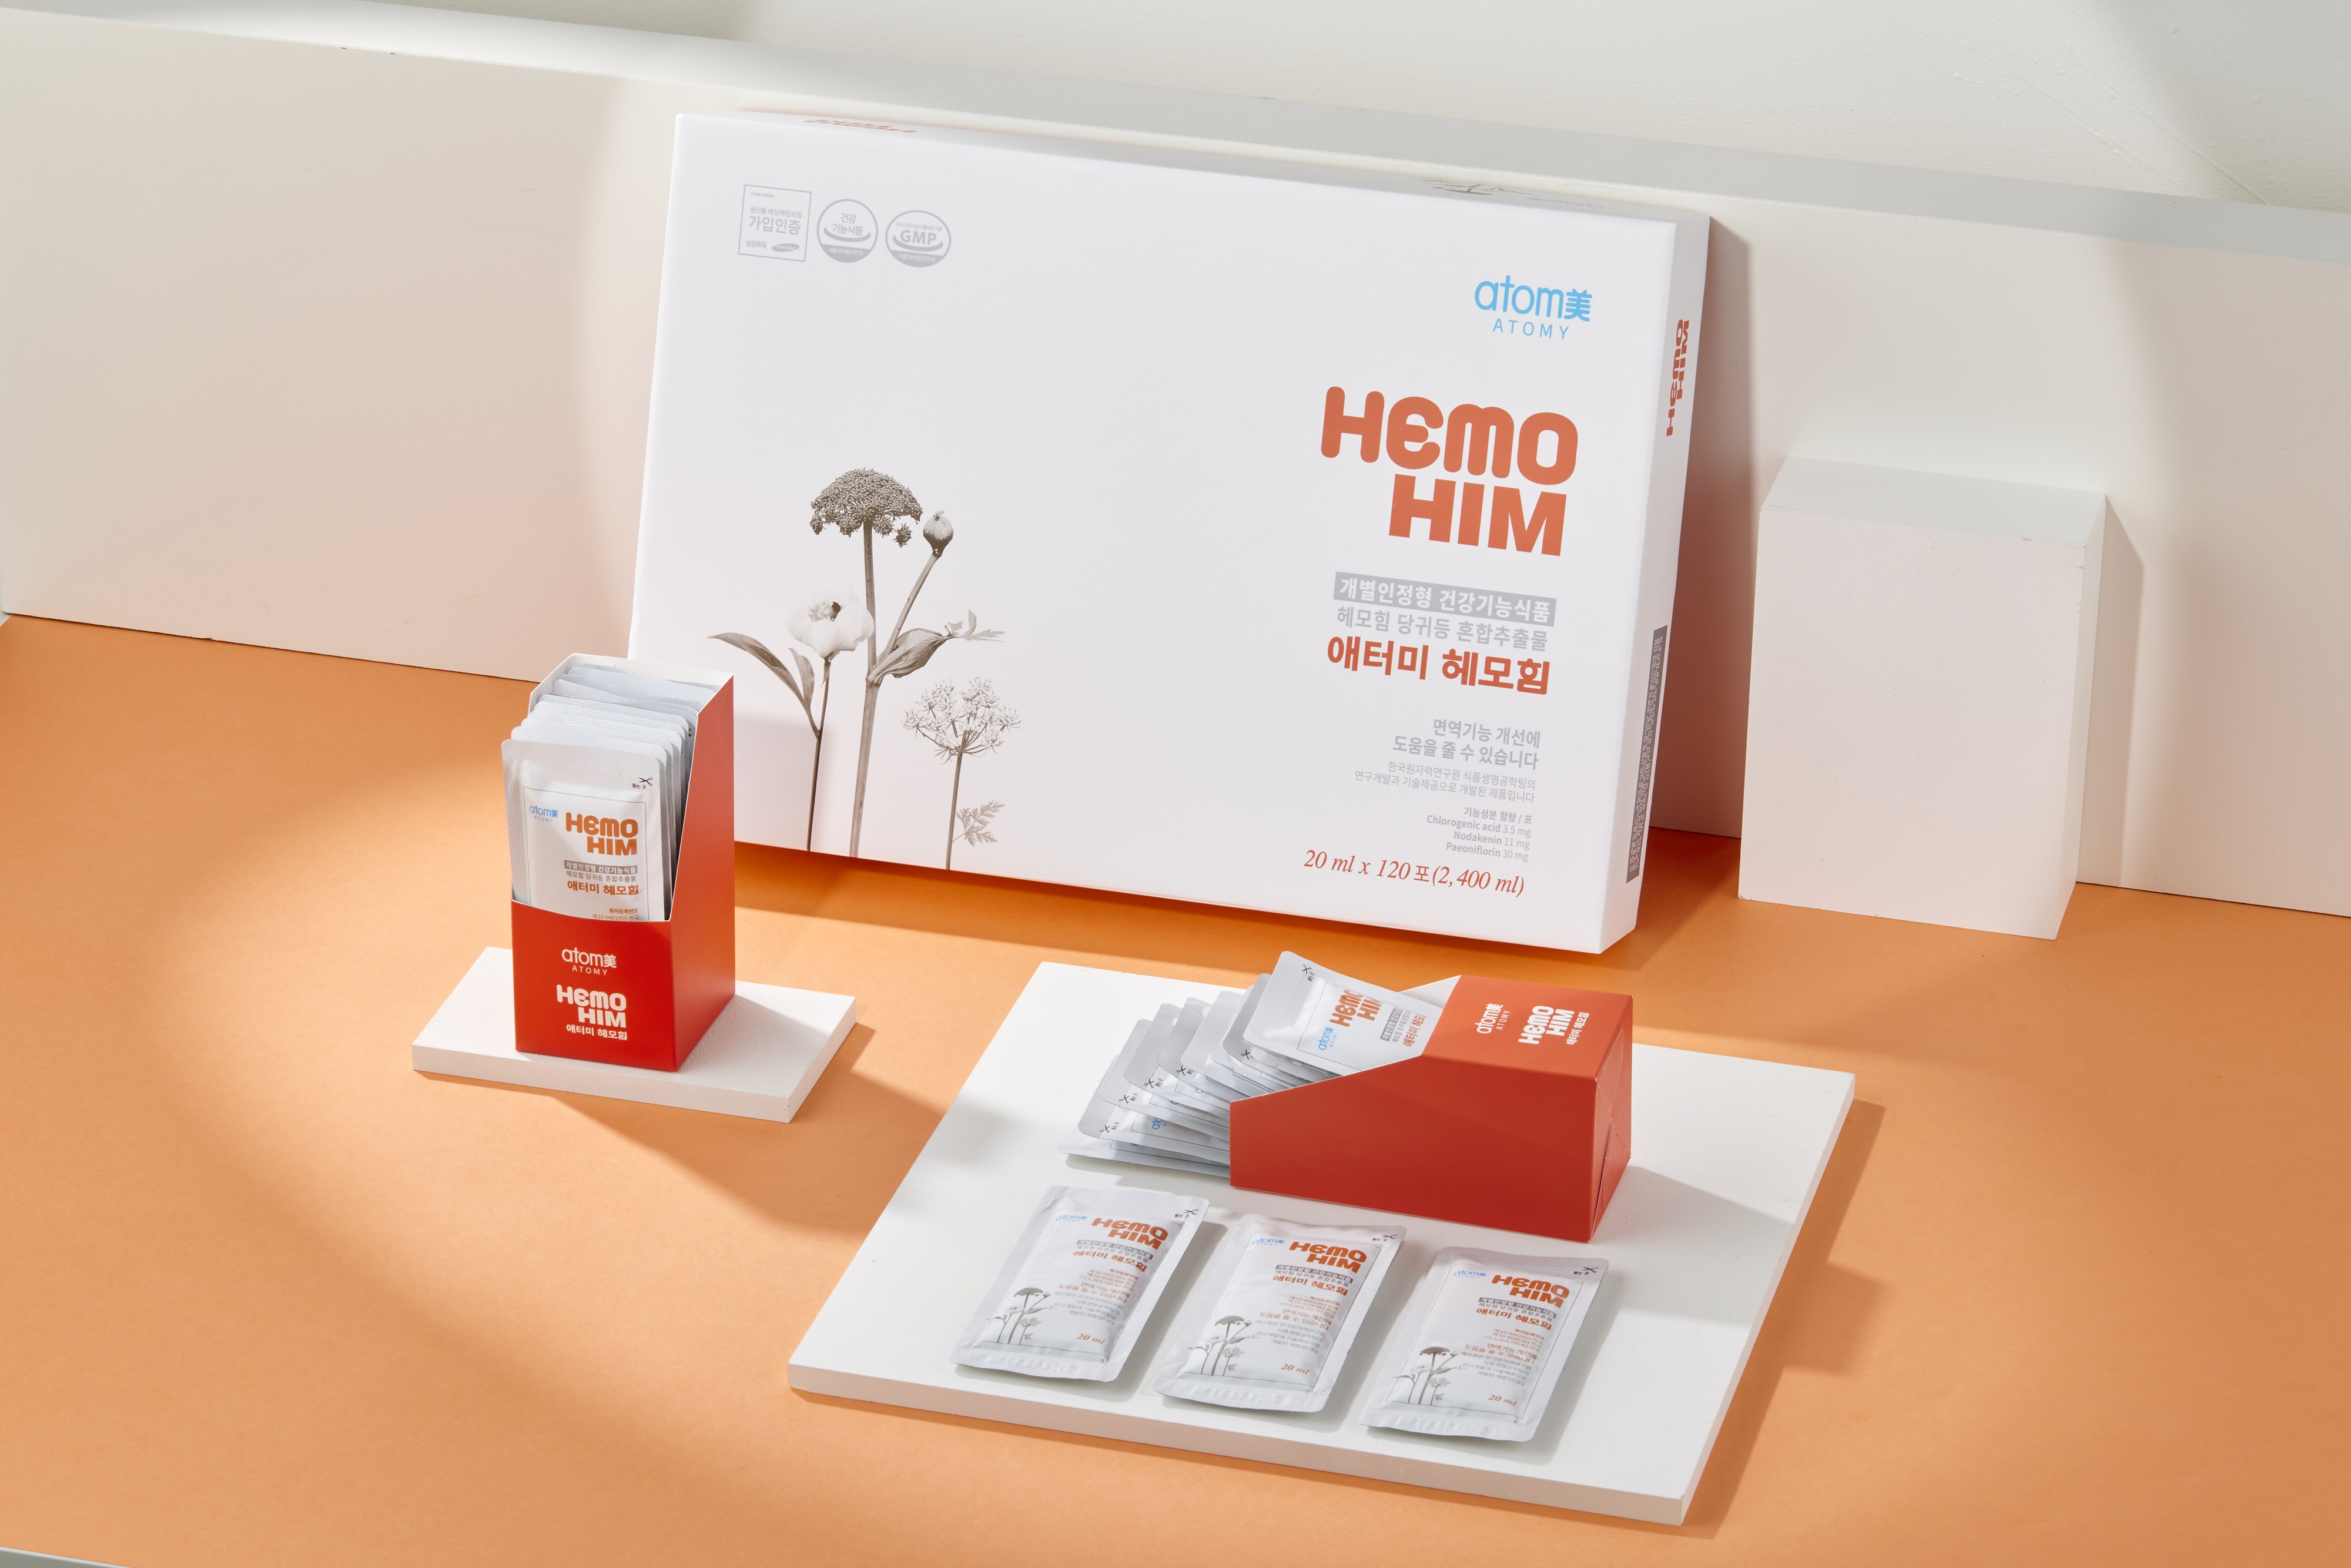 Atomy HemoHIM recorded its largest sales in the past year